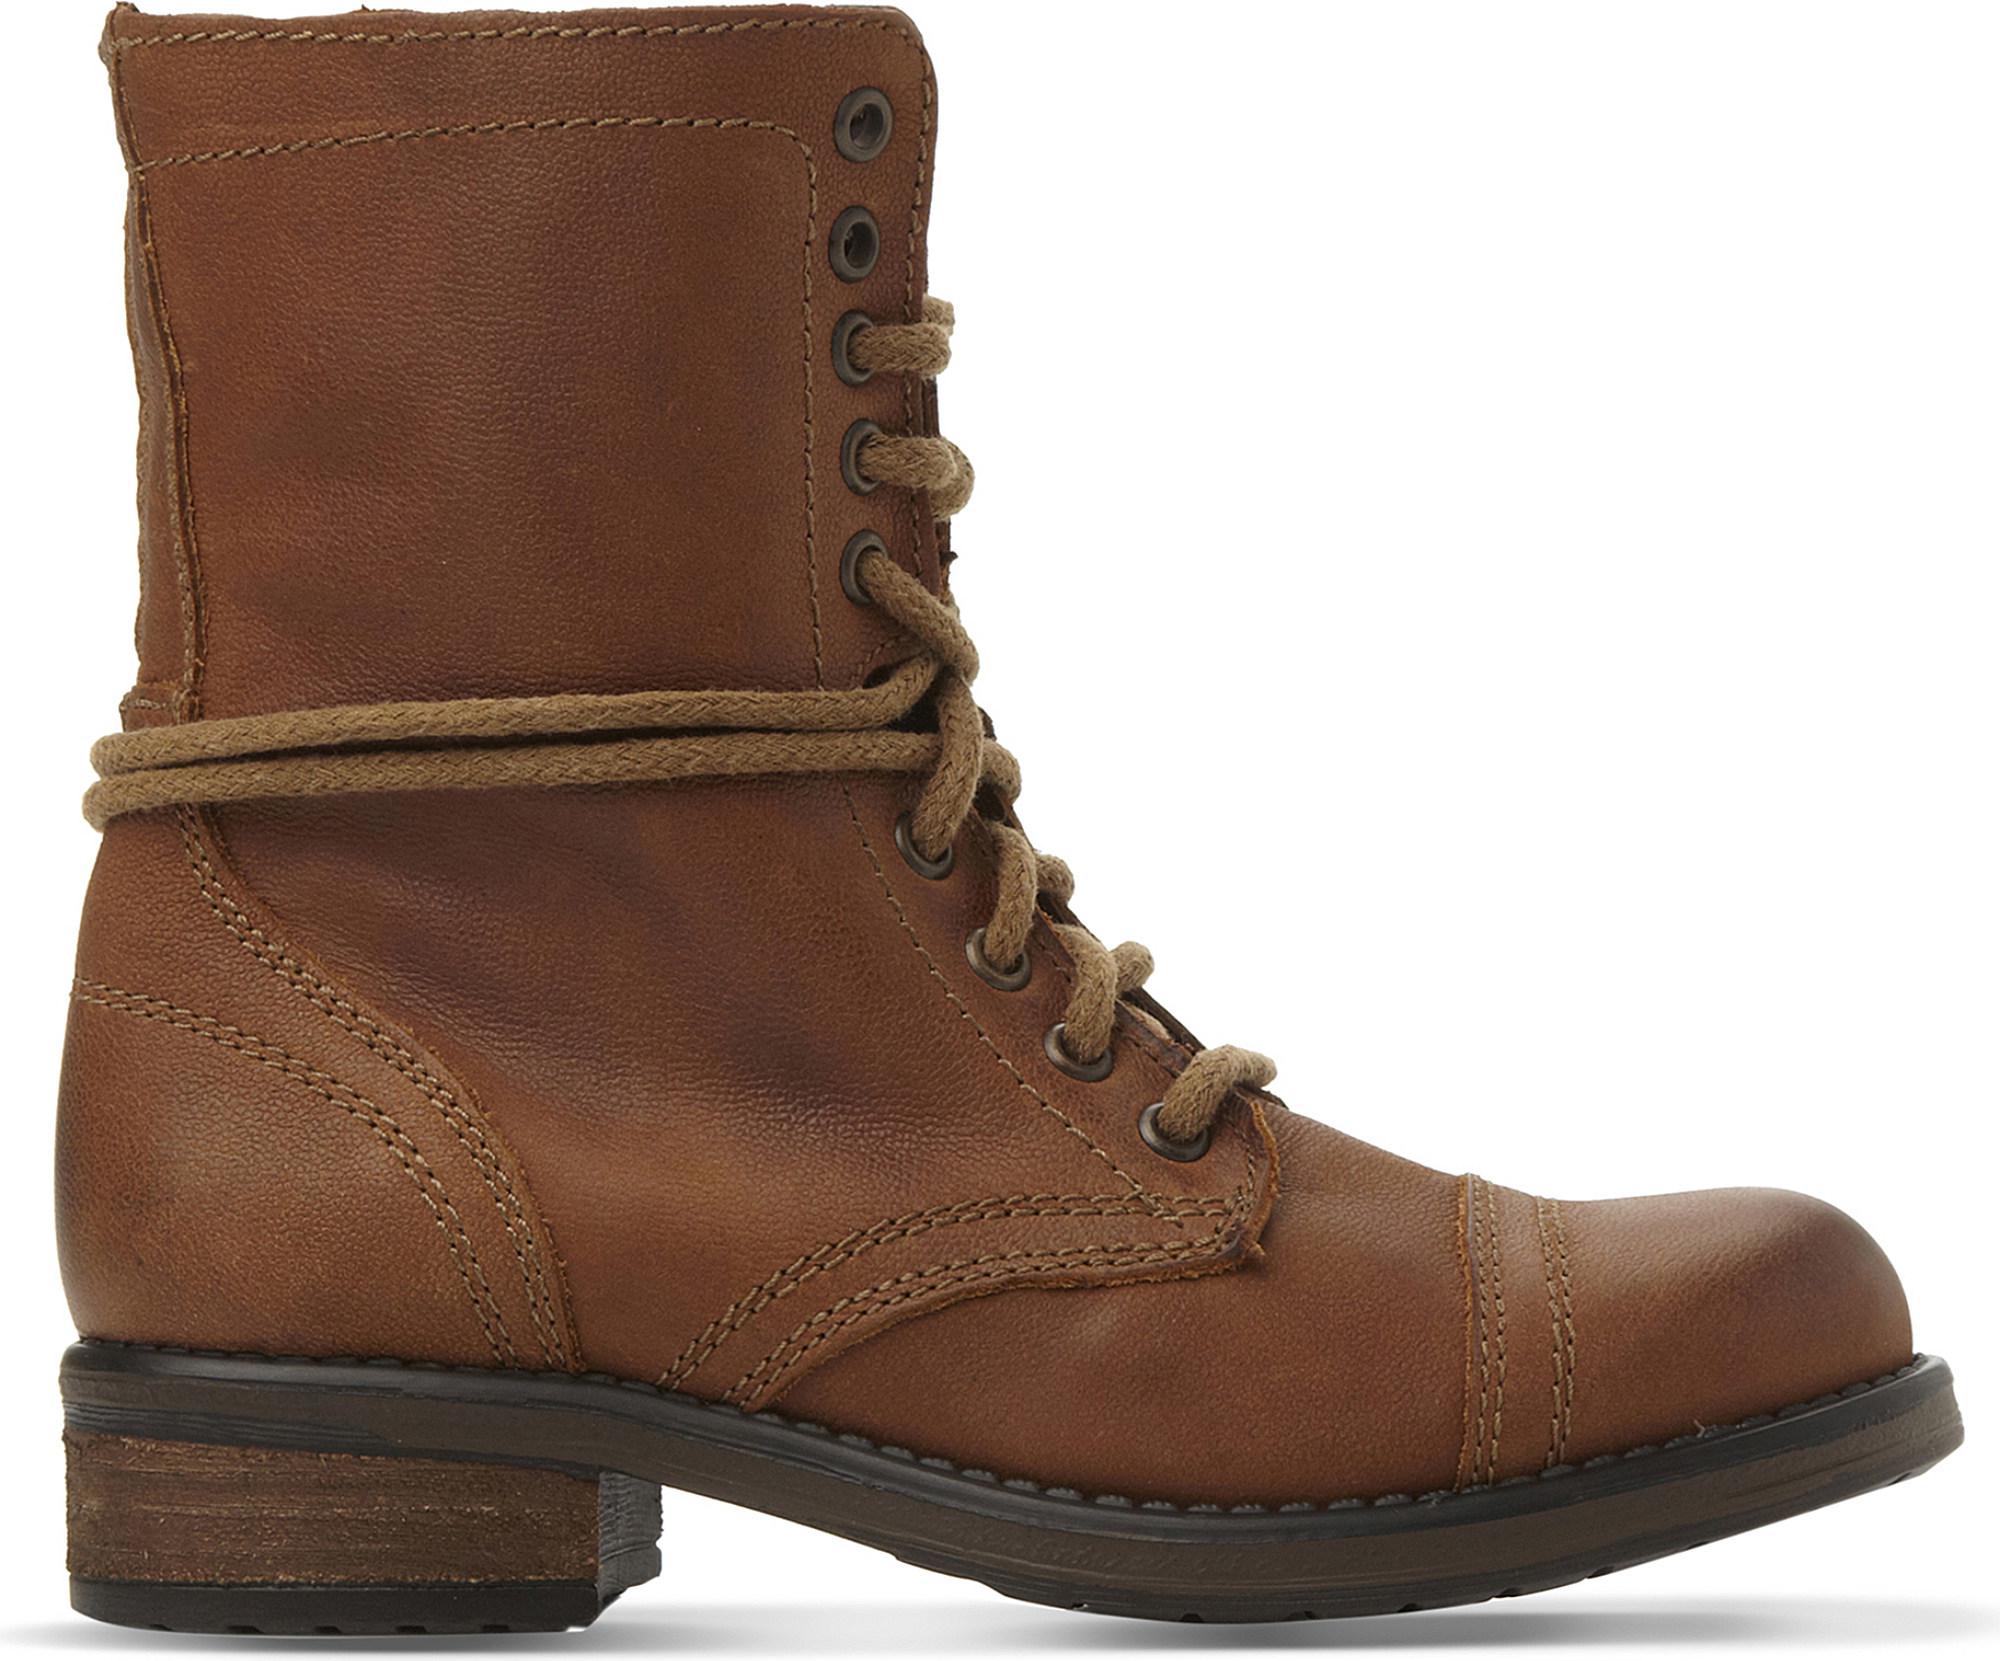 Steve Madden Troopa 2.0 Leather Ankle Boots in Tan-Leather (Brown) - Lyst